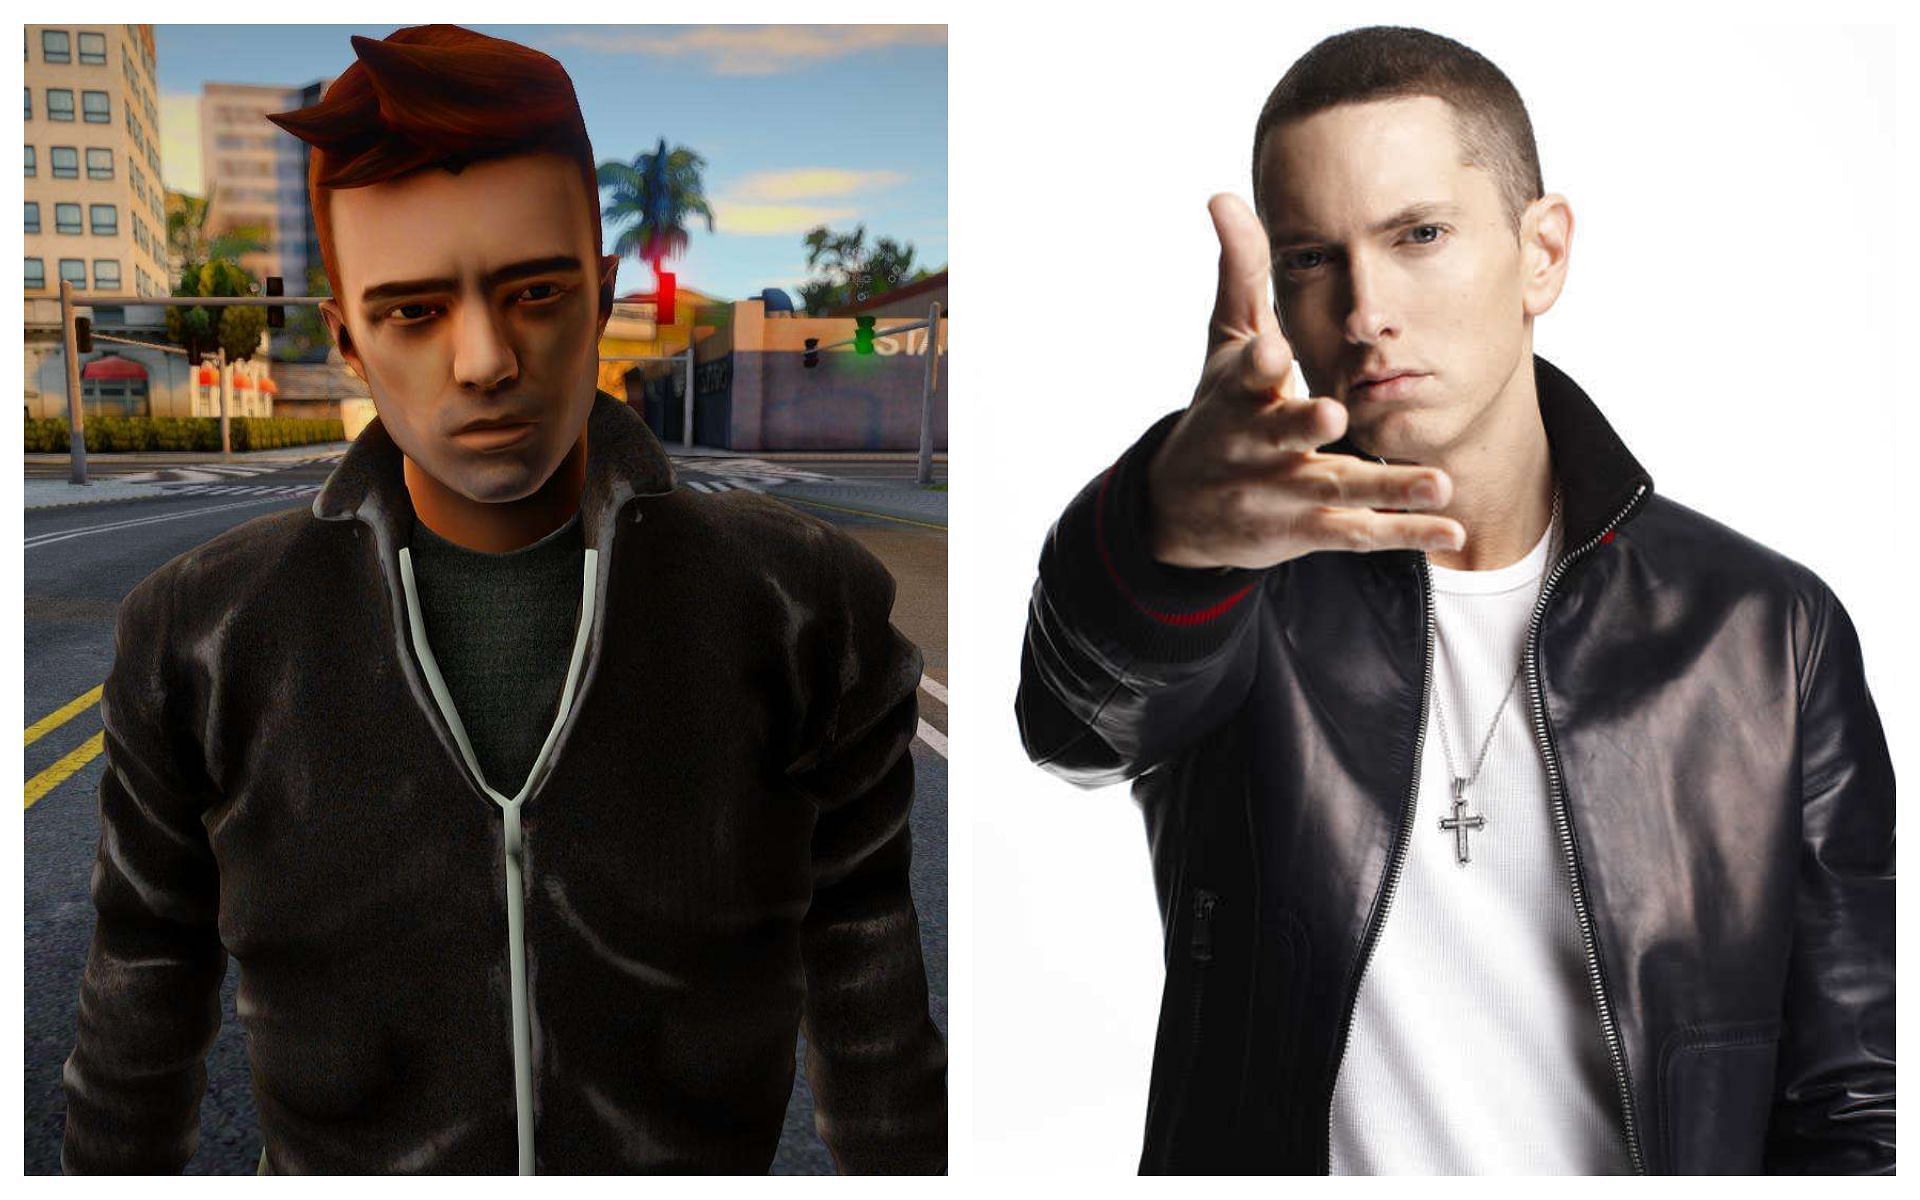 Eminem was supposed to star in a GTA movie (Images via Rockstar Games/NPR)